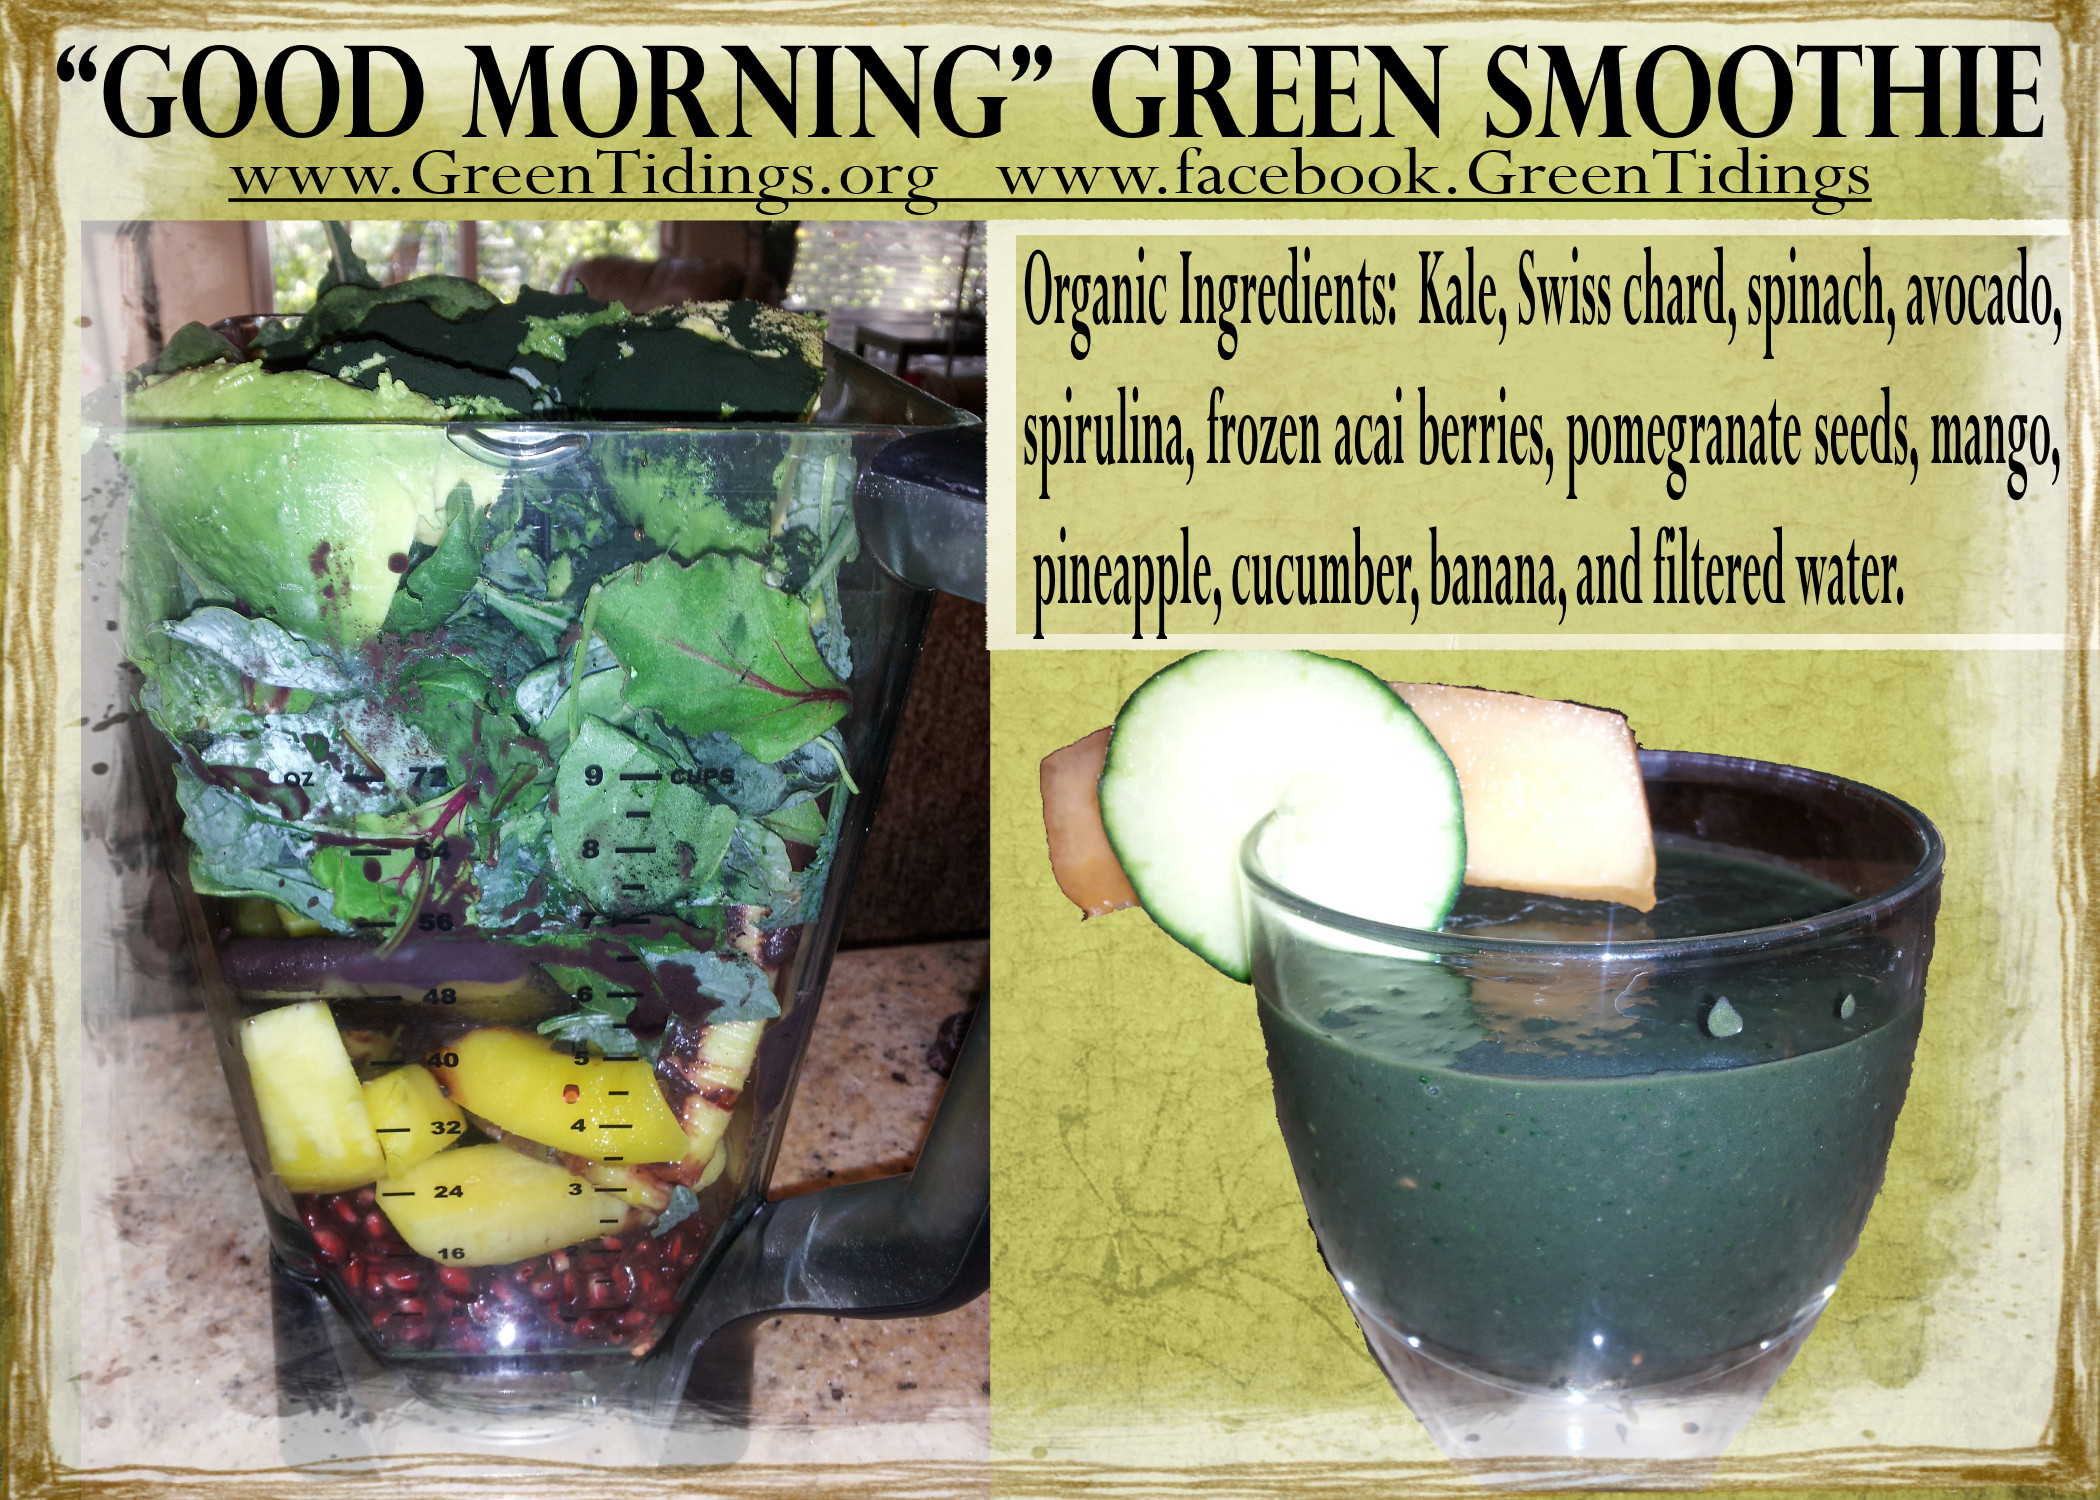 Best Morning Smoothies
 "Good Morning" Green Smoothie